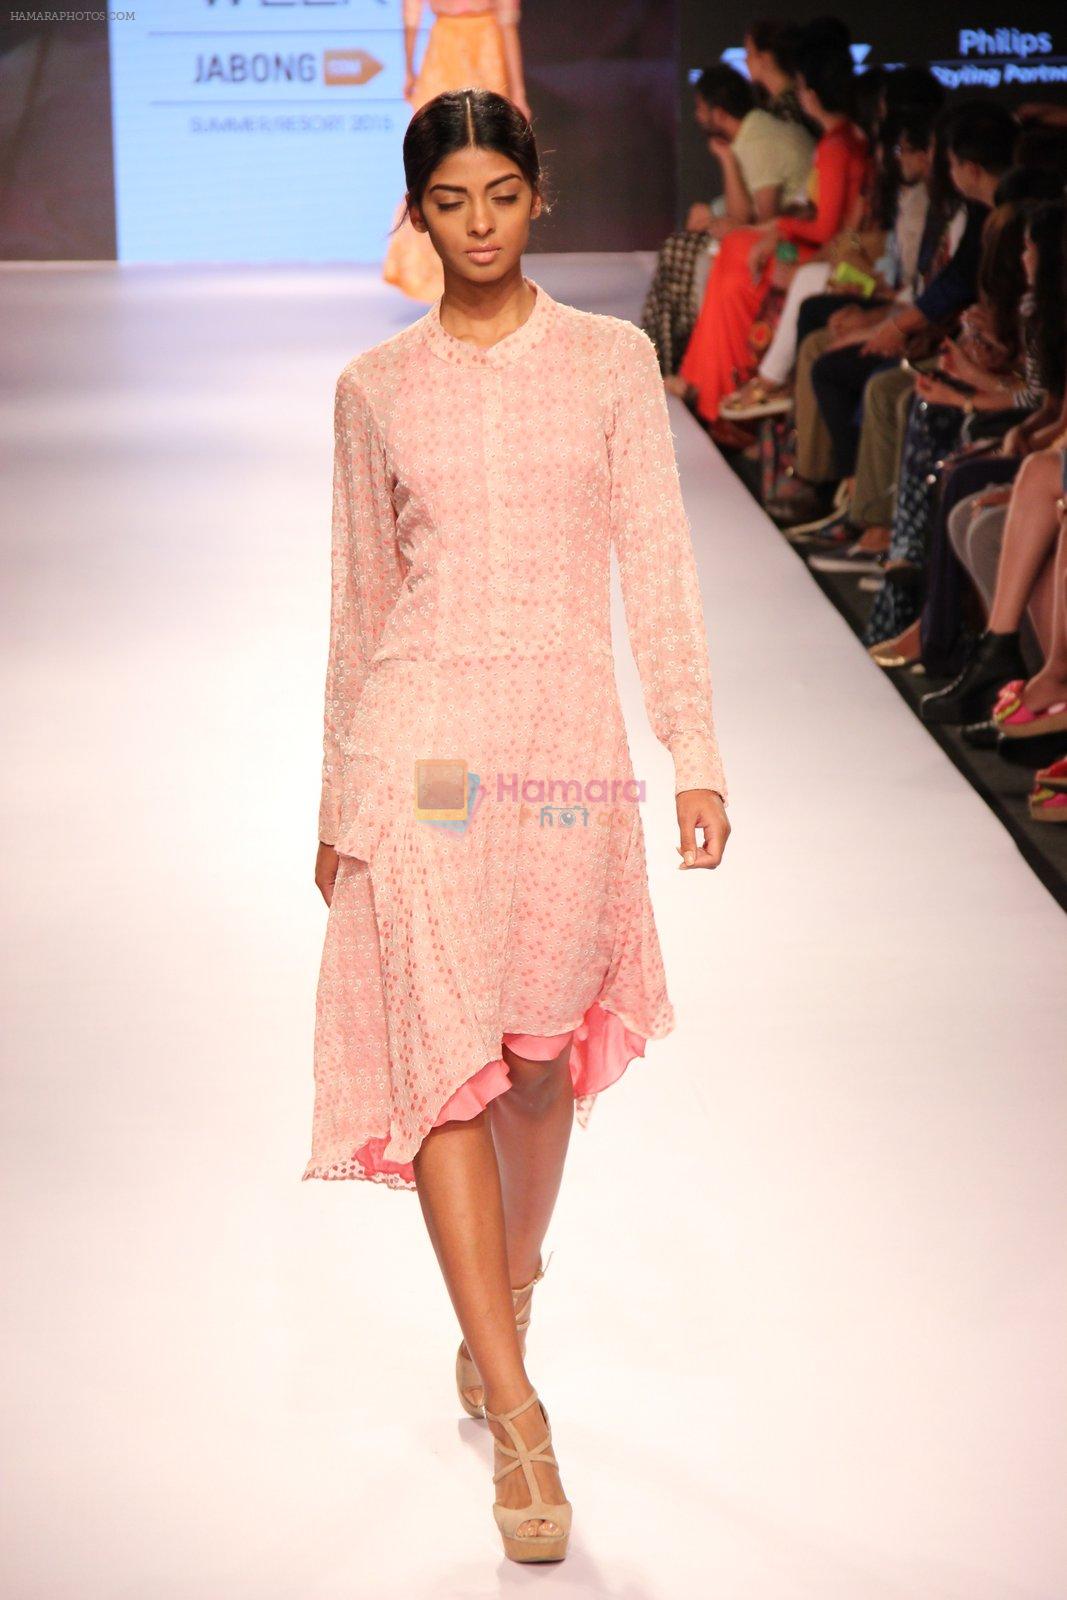 Model walks the ramp for Verb by Pallavi Singhee at Lakme Fashion Week 2015 Day 1 on 18th March 2015